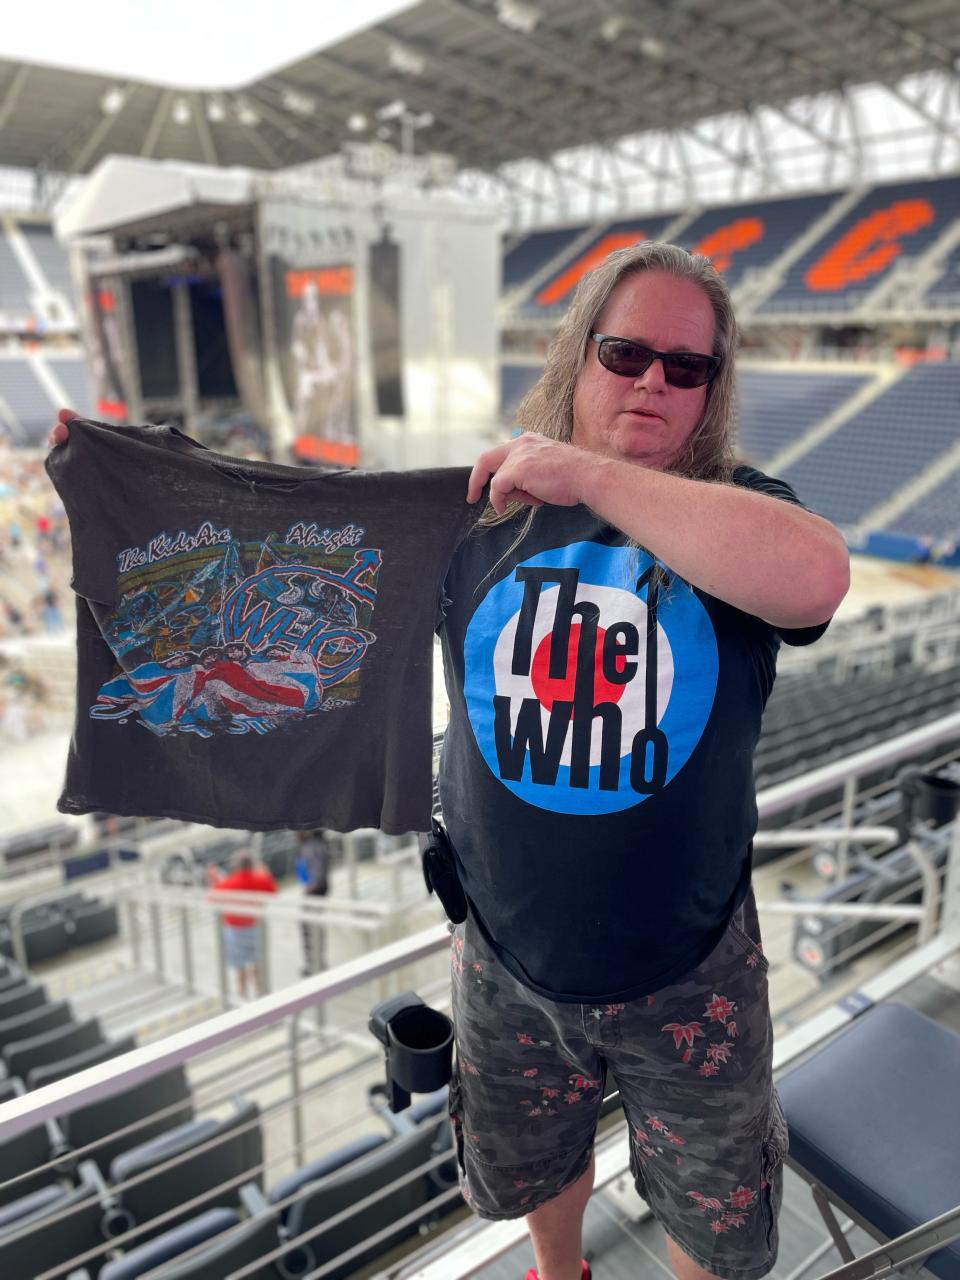 David Woloszyn of Oxford was at The Who concert in 1979. Tonight, he’s walking around TQL Stadium showing anyone and everyone what’s left of his concert T-shirt from that fateful night.